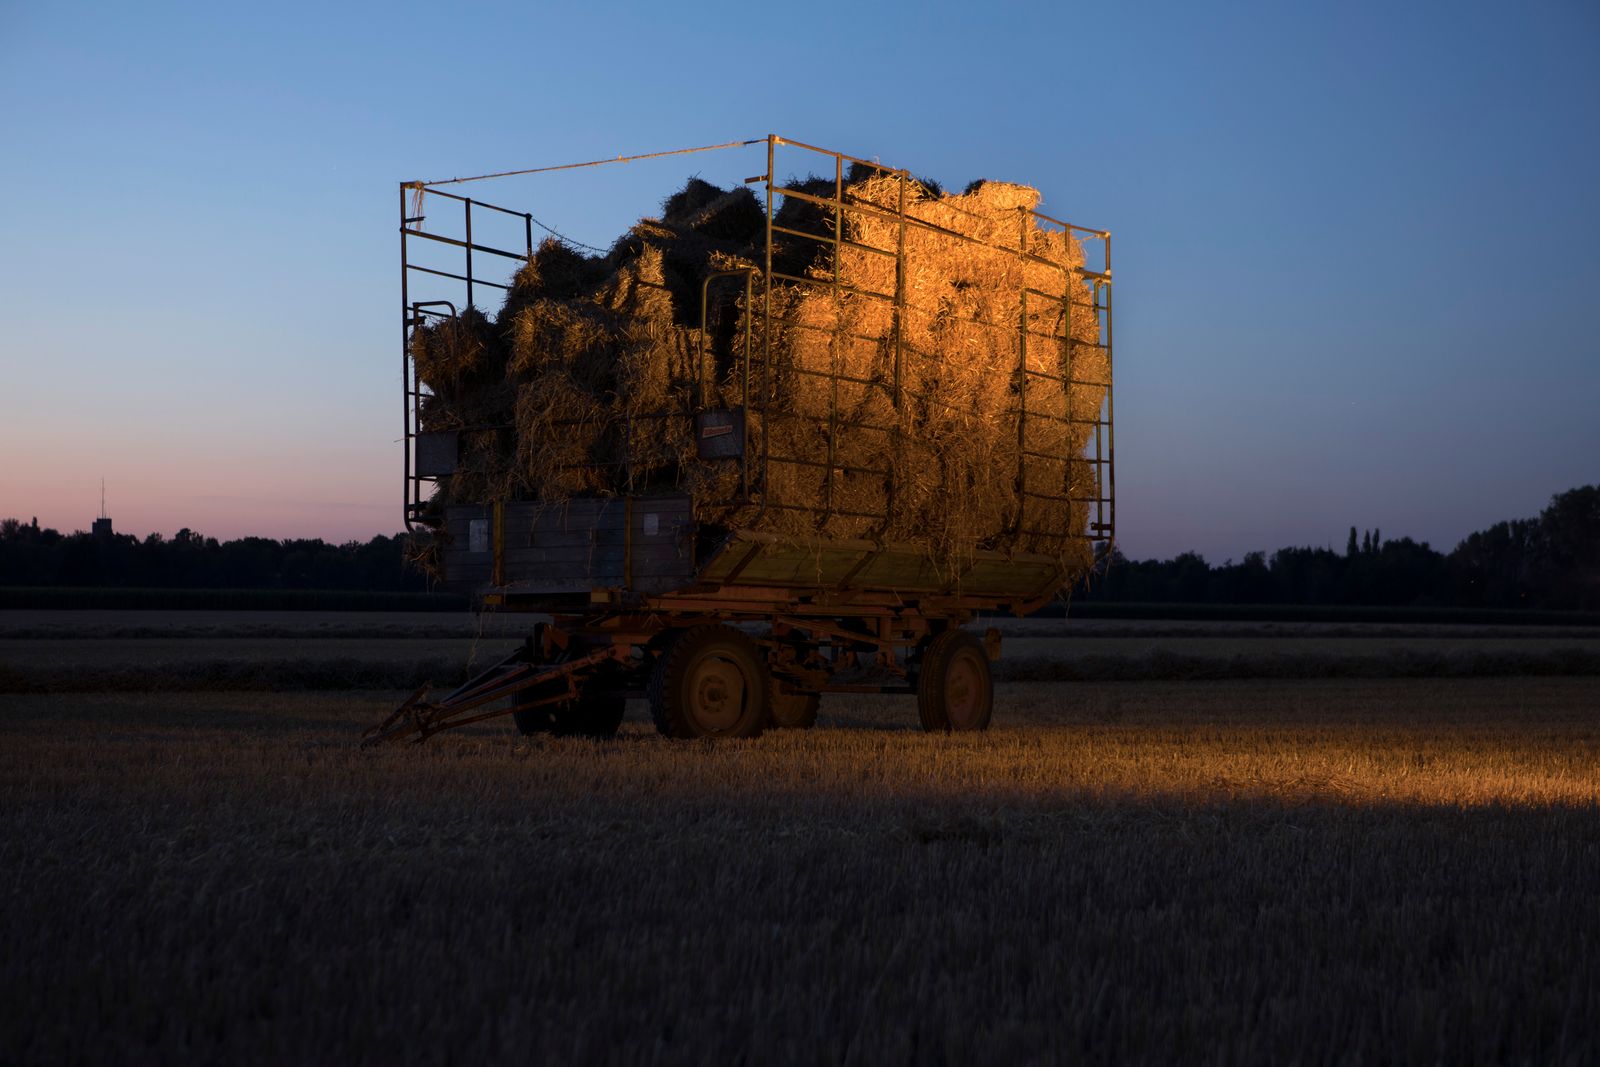 © Lara Wilde - Fetching thatch form the fields in the evening. The wagon later caught fire because it was standing in the sun.